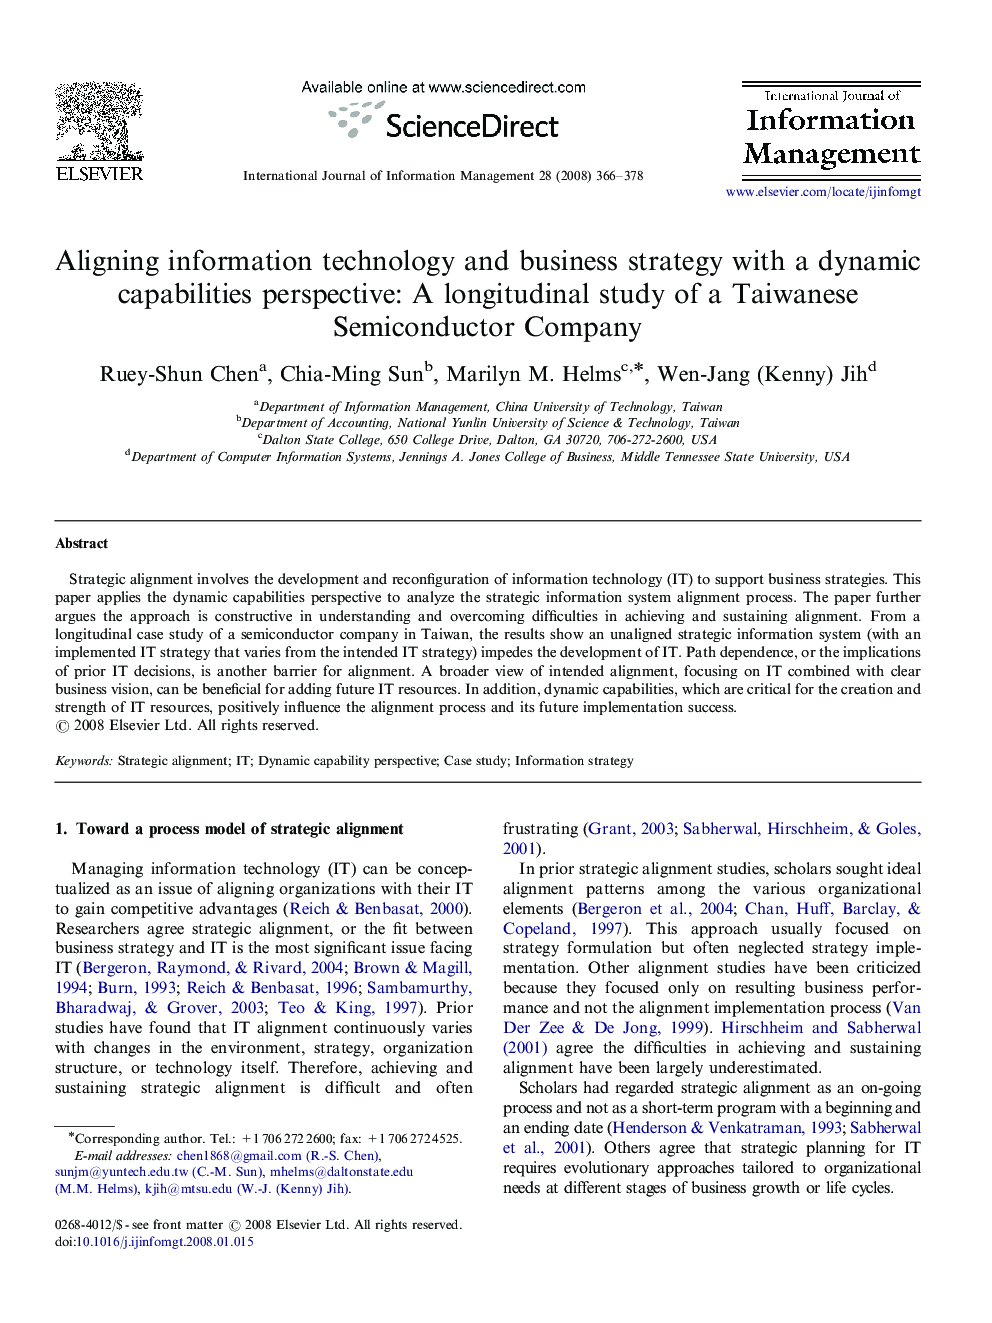 Aligning information technology and business strategy with a dynamic capabilities perspective: A longitudinal study of a Taiwanese Semiconductor Company